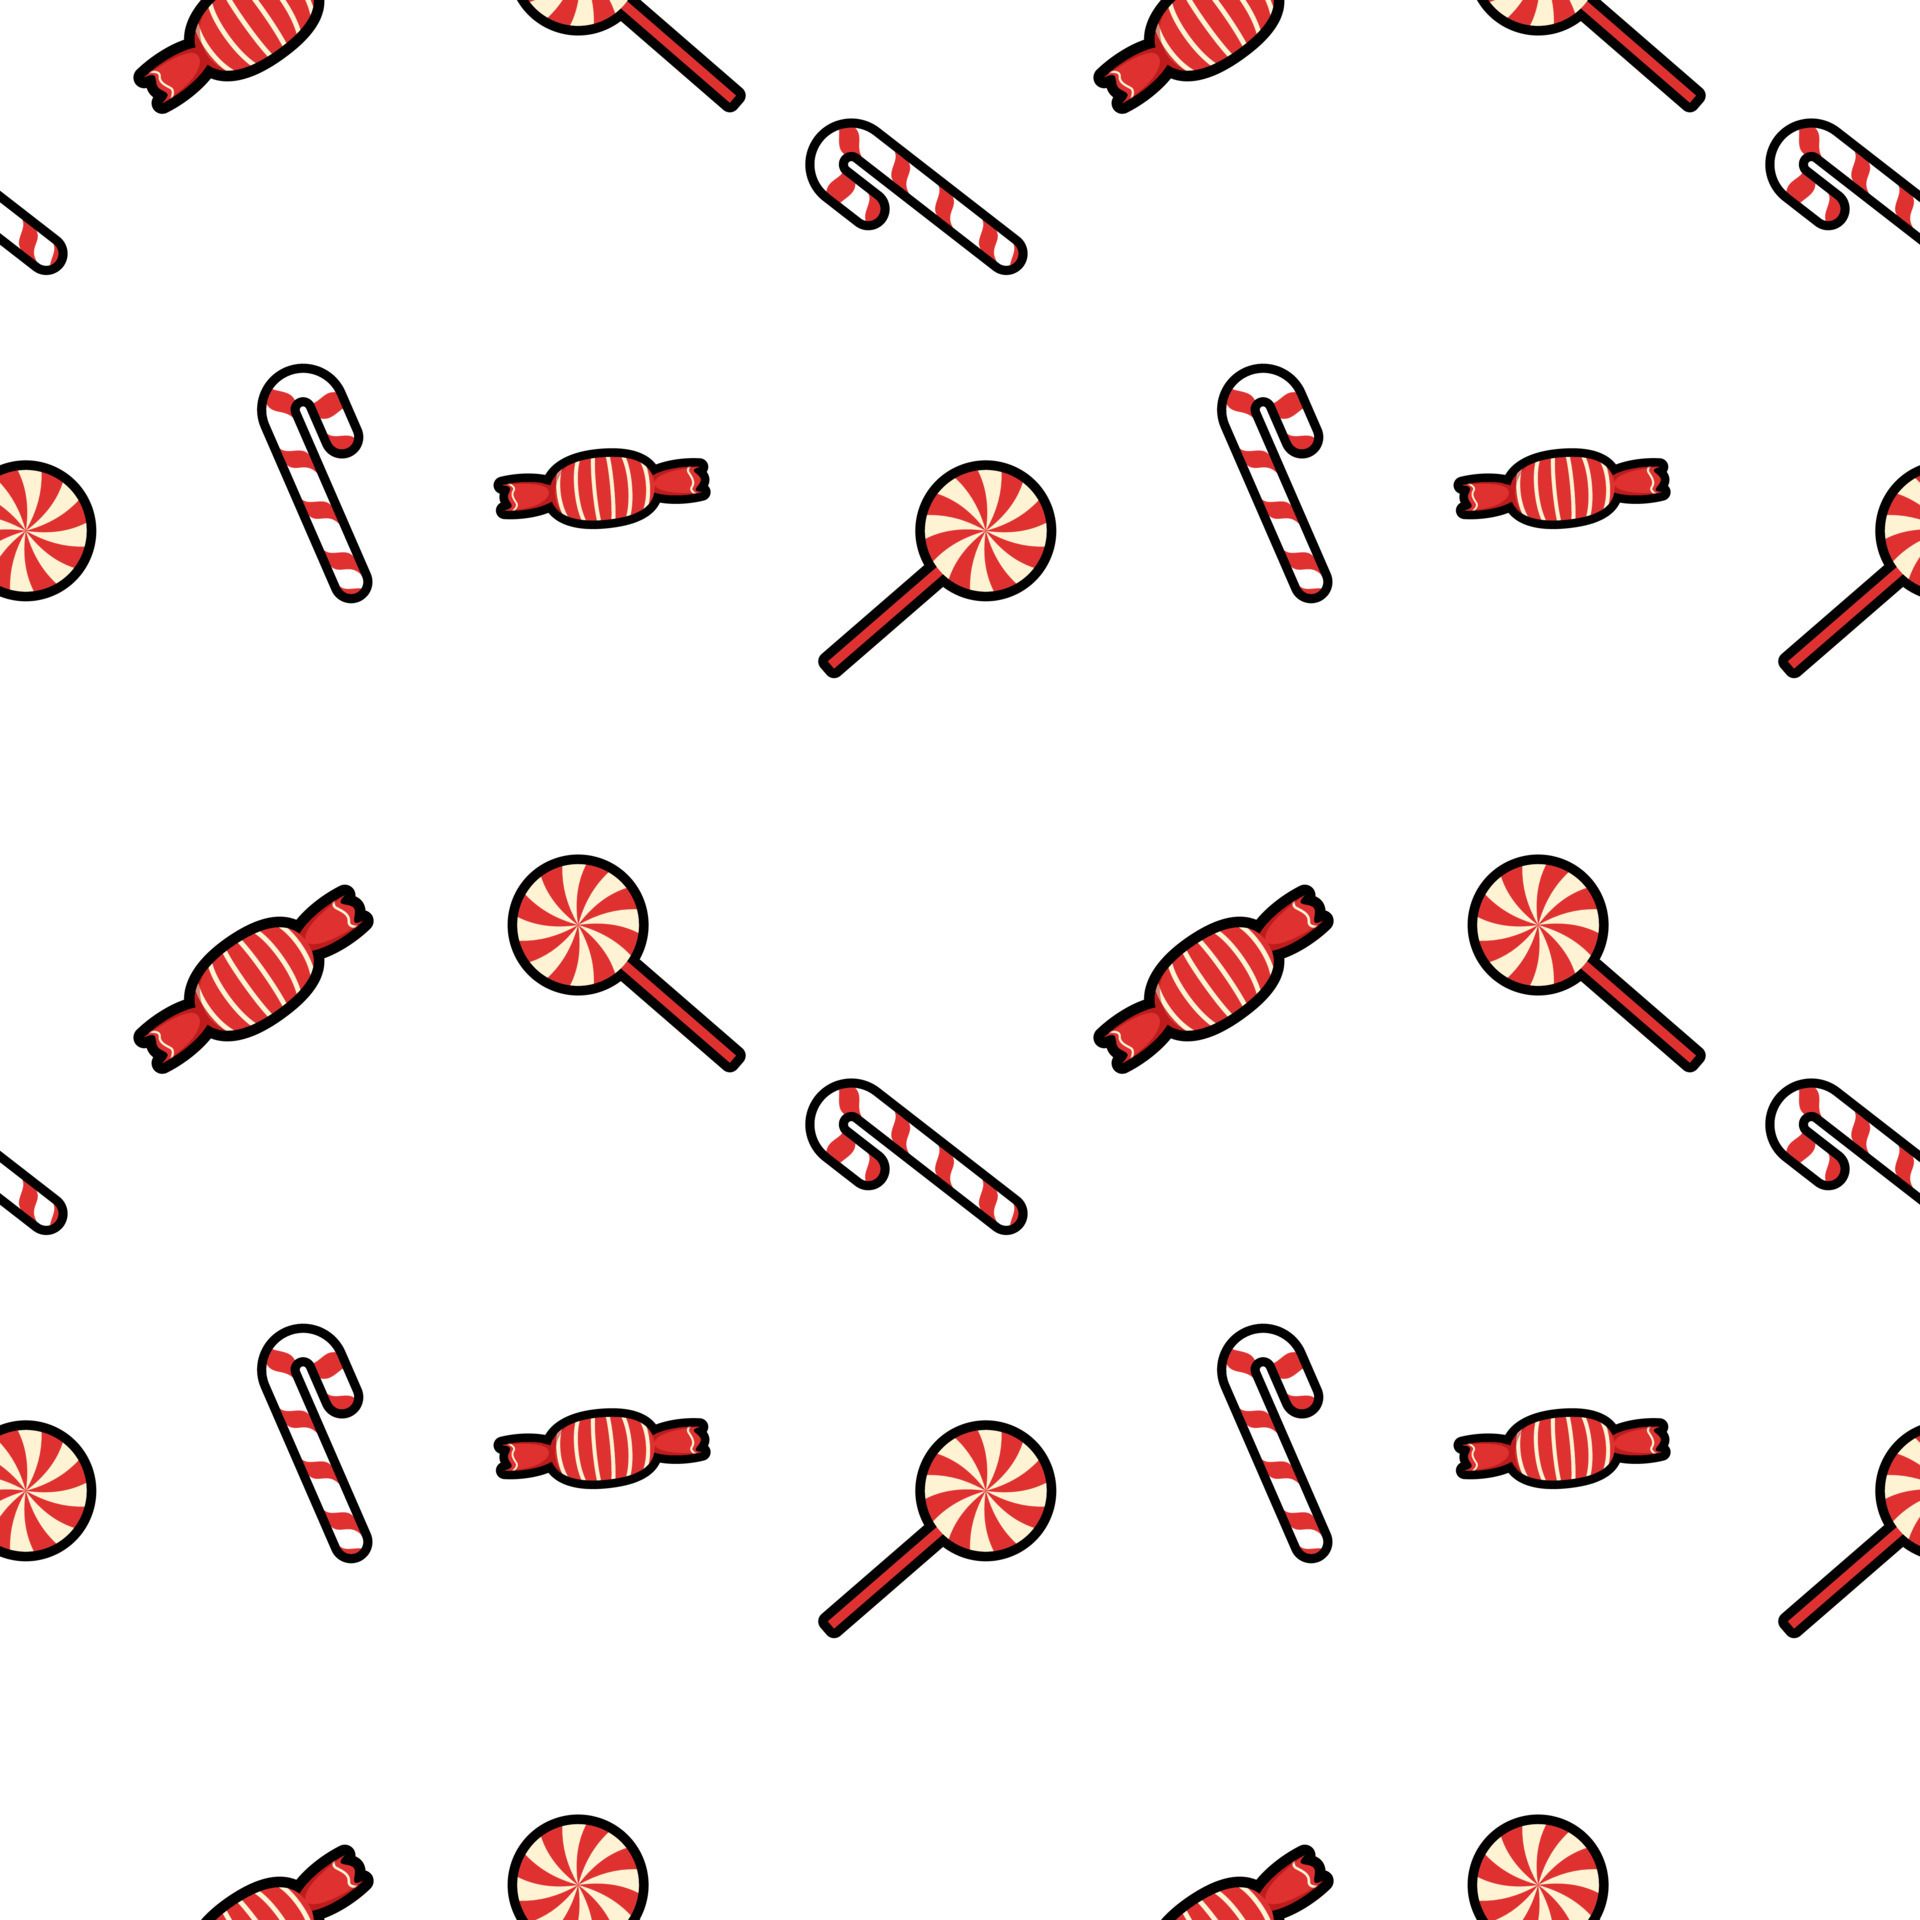 candy cane, candy, lollipop, sweets seamless pattern background. Perfect for winter holiday fabric, giftwrap, scrapbook, greeting cards design projects